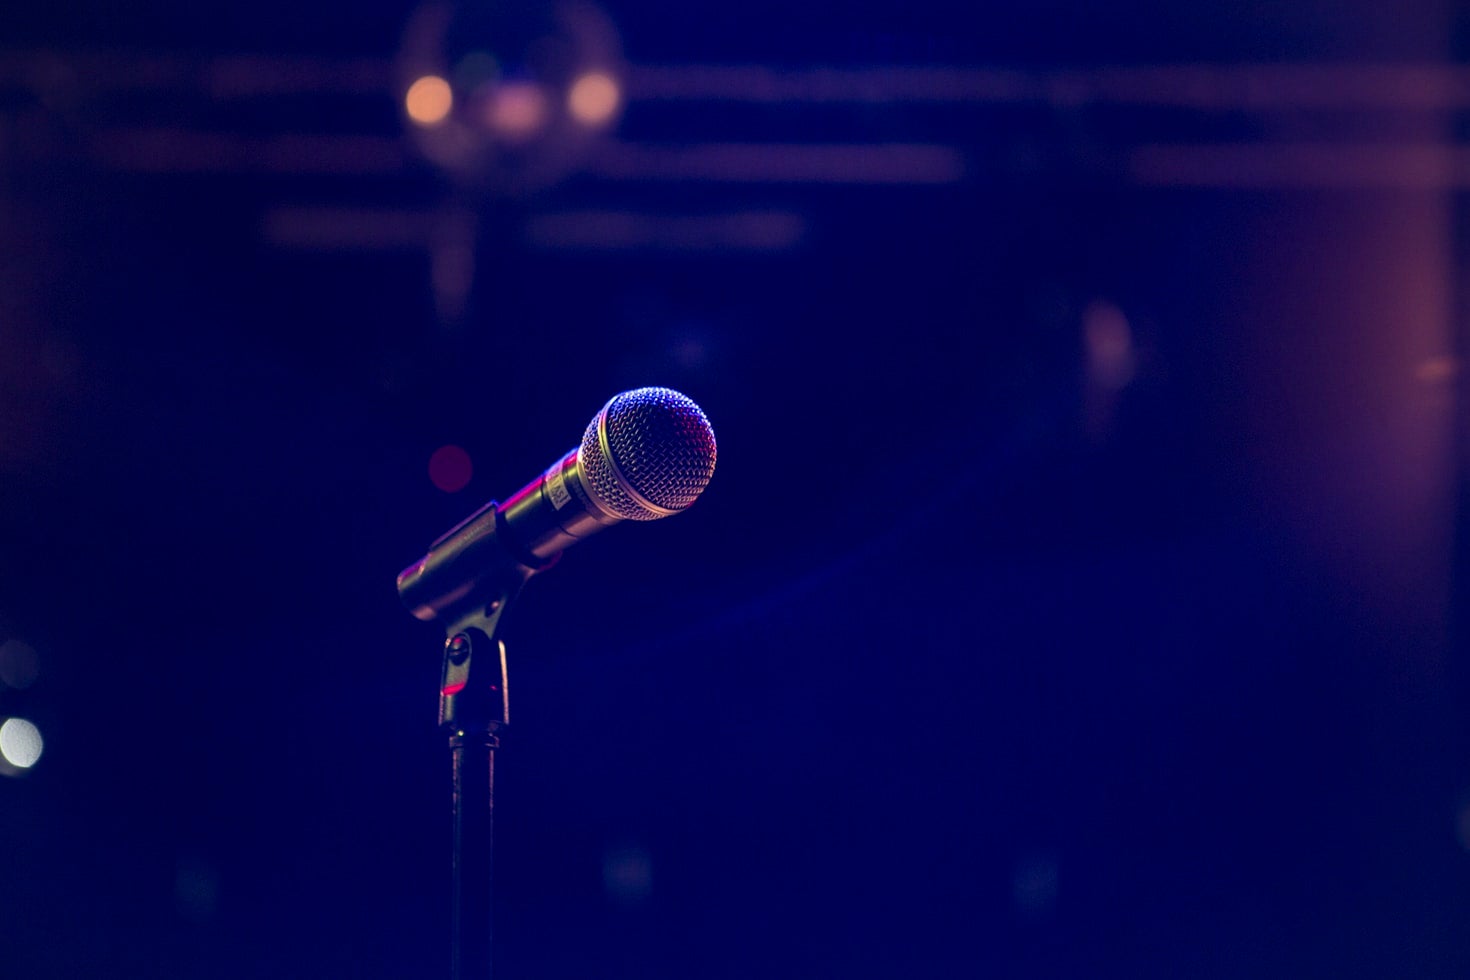 microphone with dark blue lighting in background